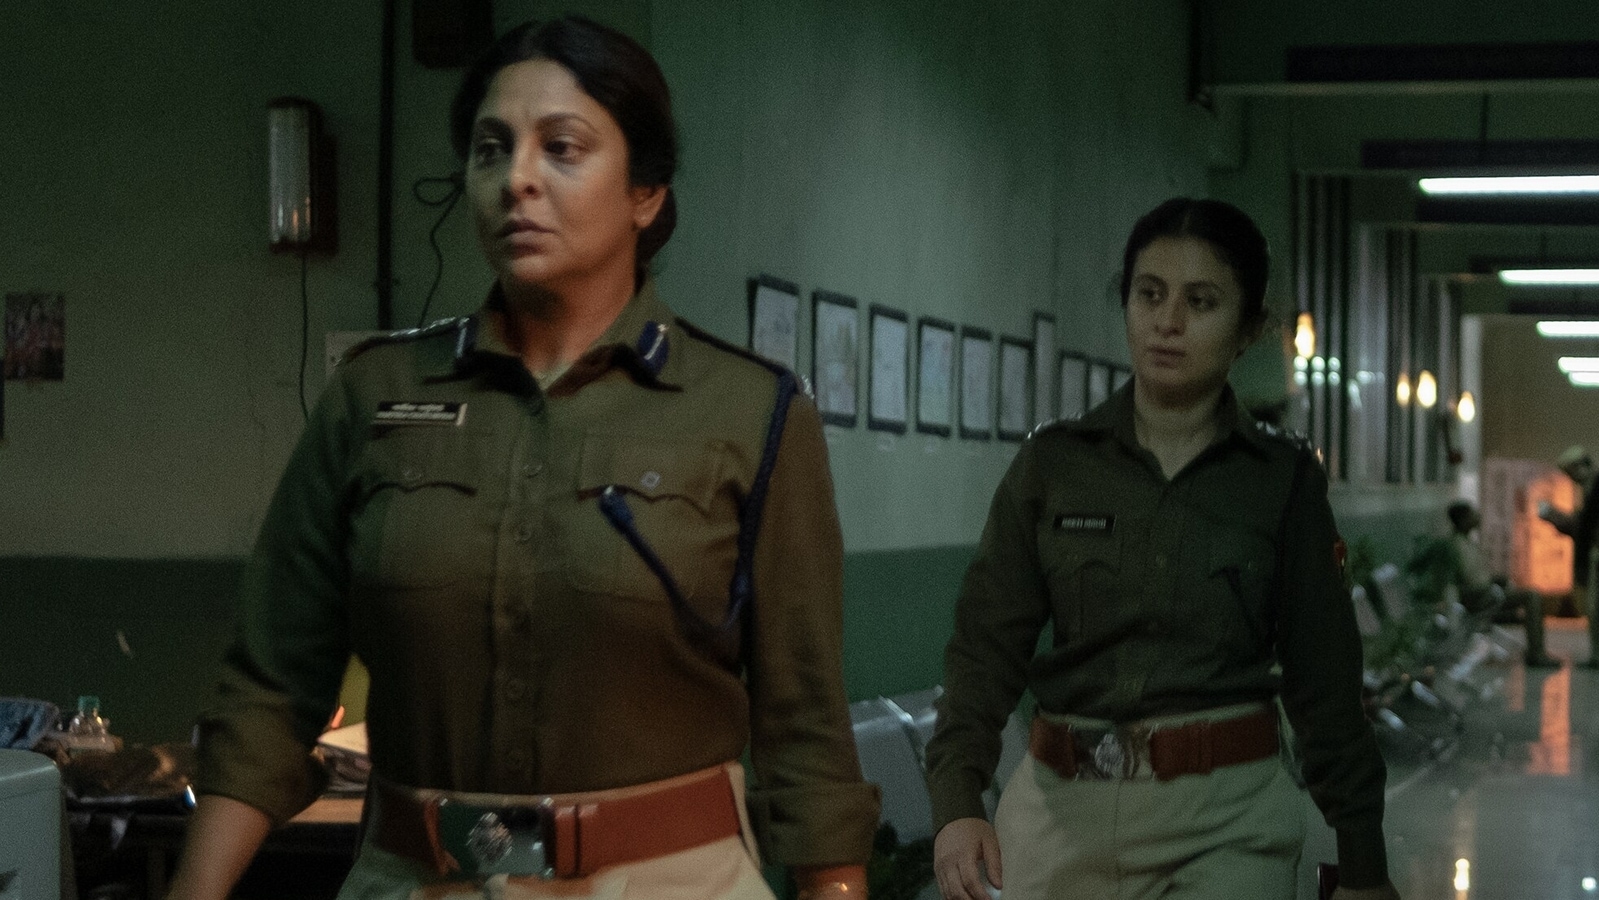 Delhi Crime 2 director Tanuj Chopra defends show’s graphic depiction of violence: ‘We had to show the severity’